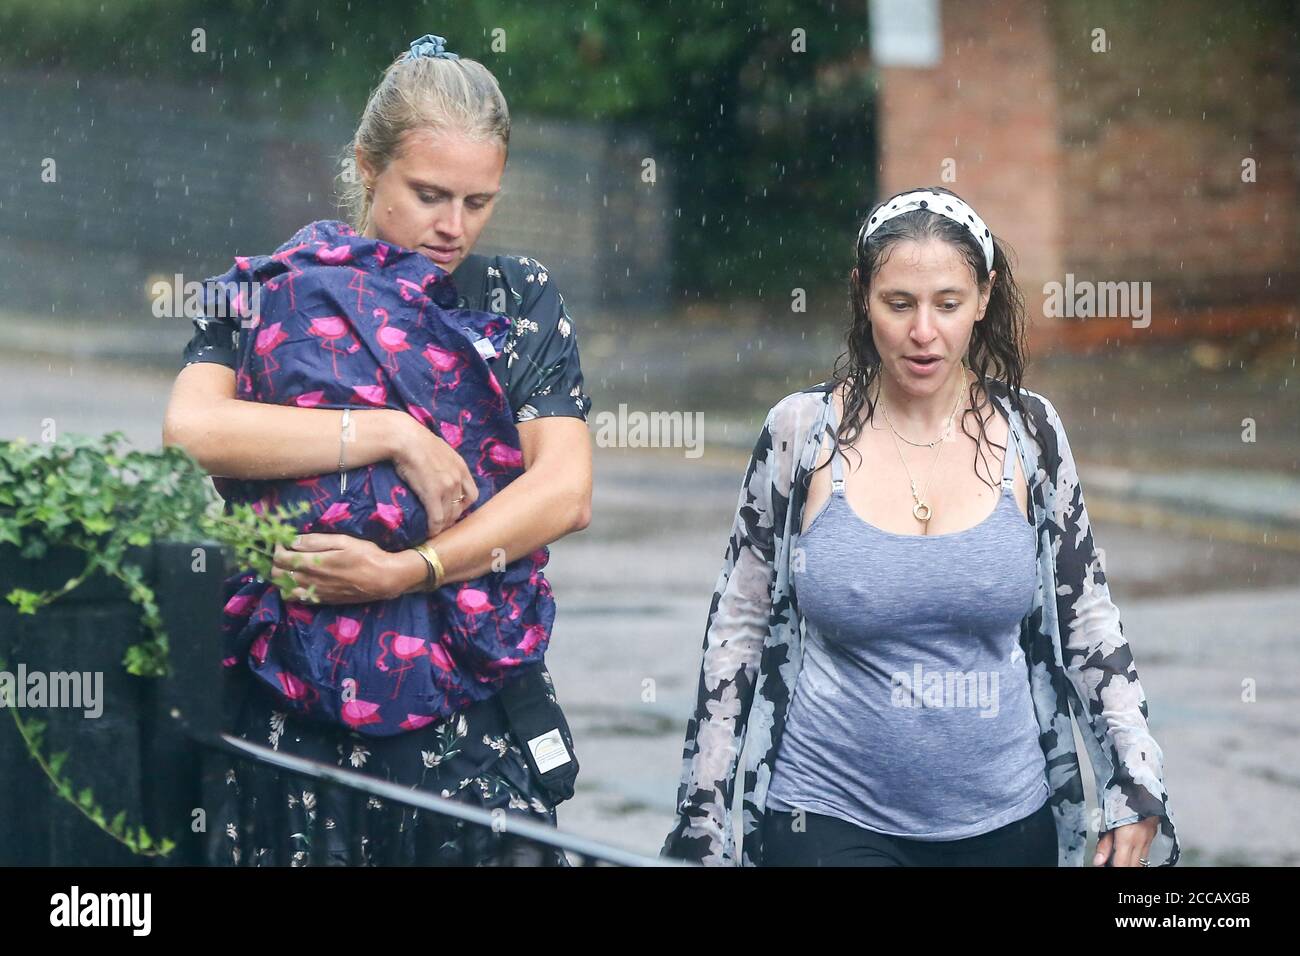 London, UK. 17th Aug, 2020. Women are caught in heavy rain as Storm Ellen brings rainfall with gusty winds in north London.According to the Met Office, warmer weather with highs of 24 degrees Celsius is forecasted for the rest of the week. Credit: Dinendra Haria/SOPA Images/ZUMA Wire/Alamy Live News Stock Photo